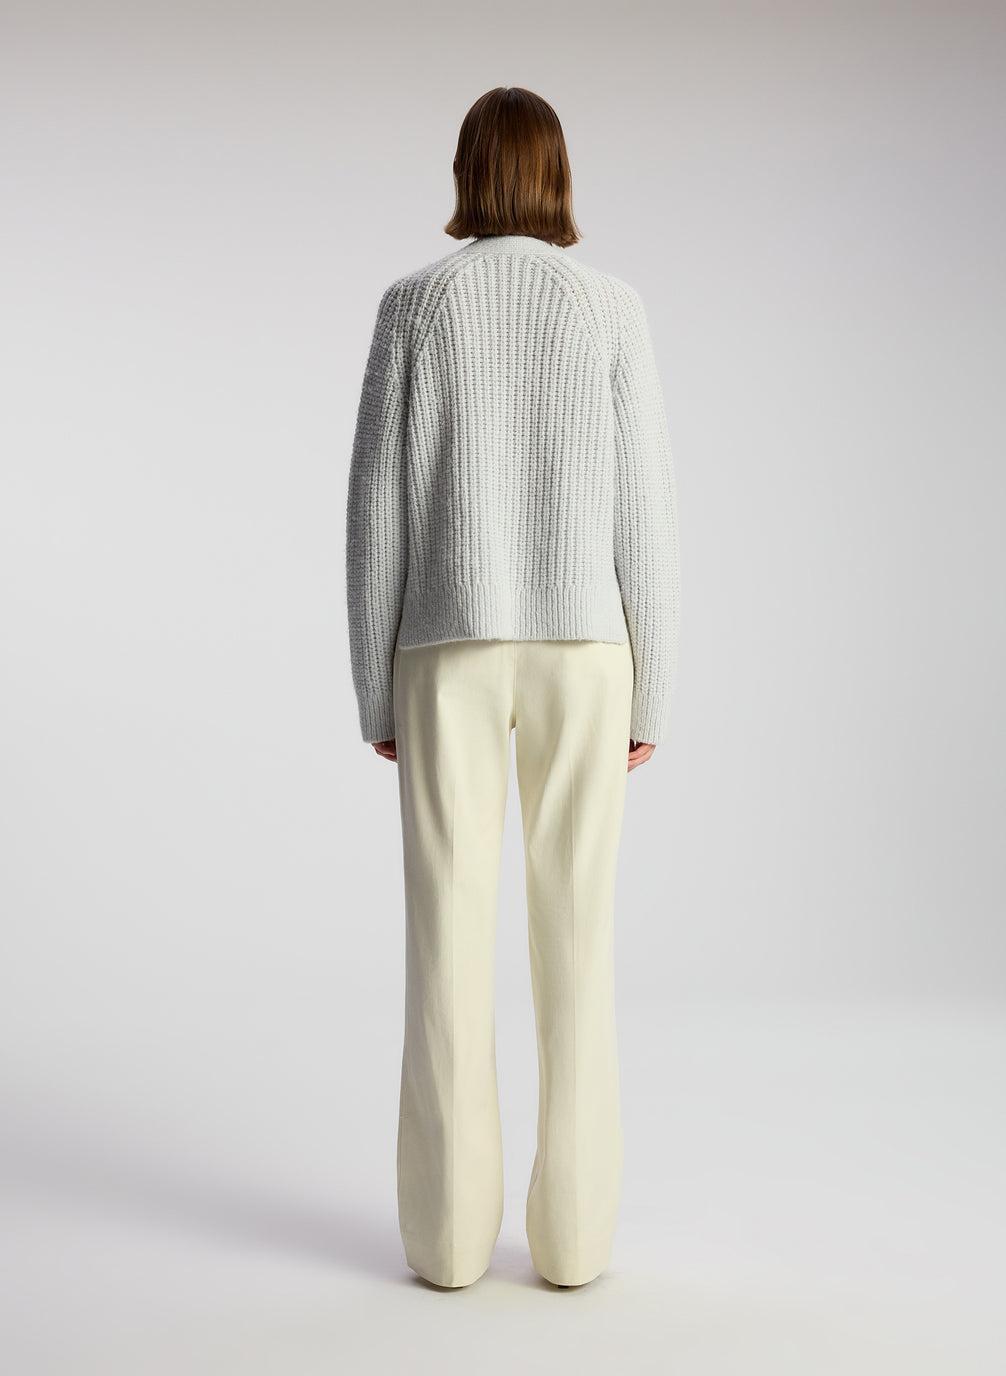 back view of woman wearing beige pants and blue cardigan